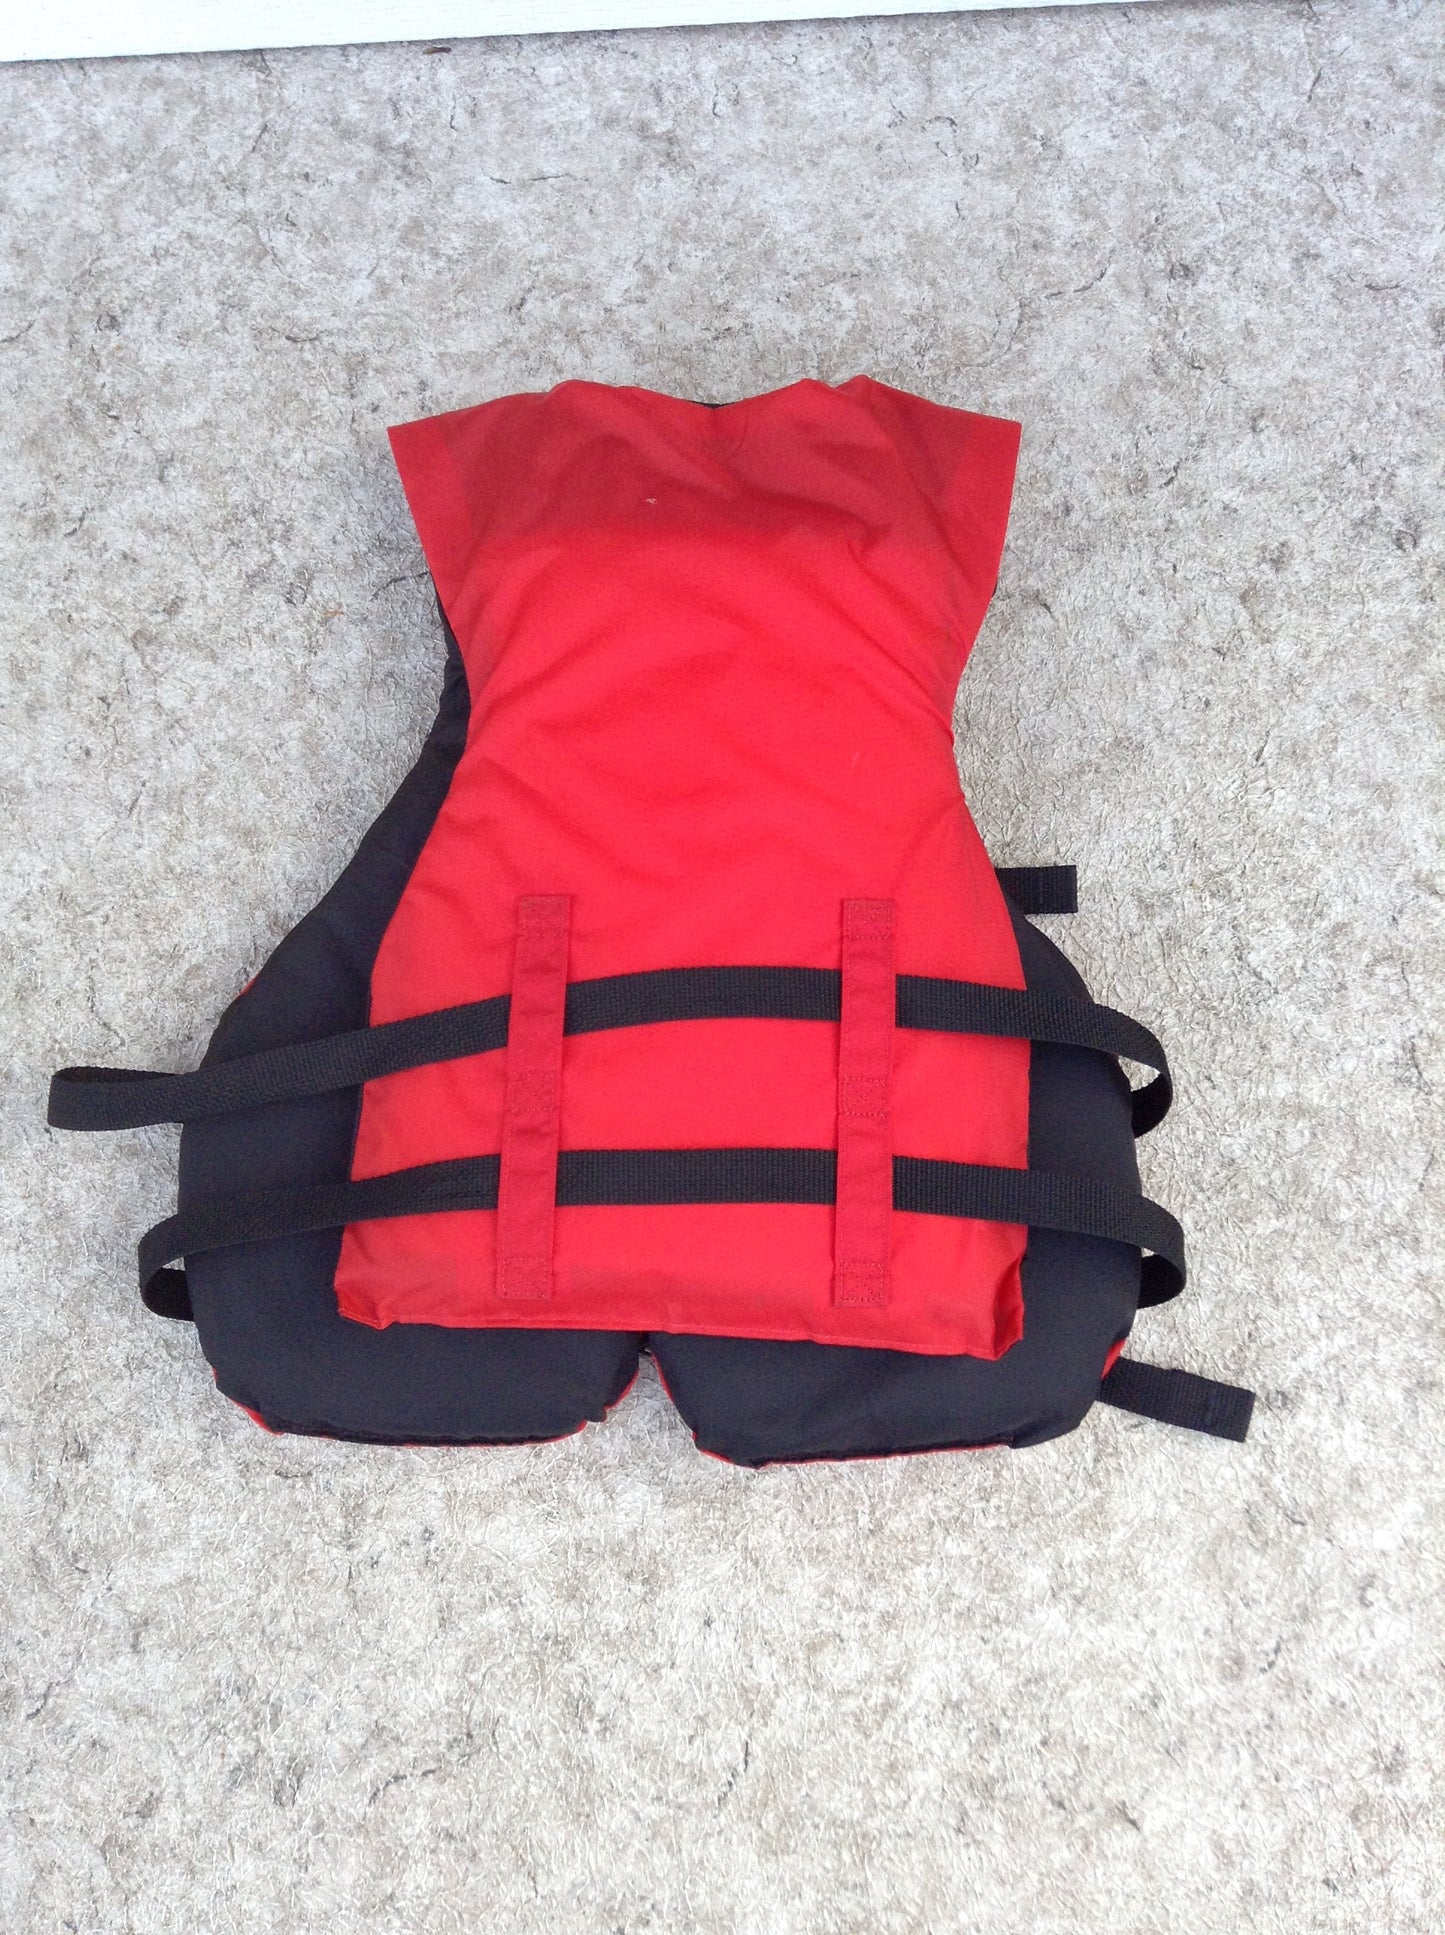 Life Jacket Adult Universal One Size 90-200 lb Adjustable Mustang Survival Black Red New Demo Model